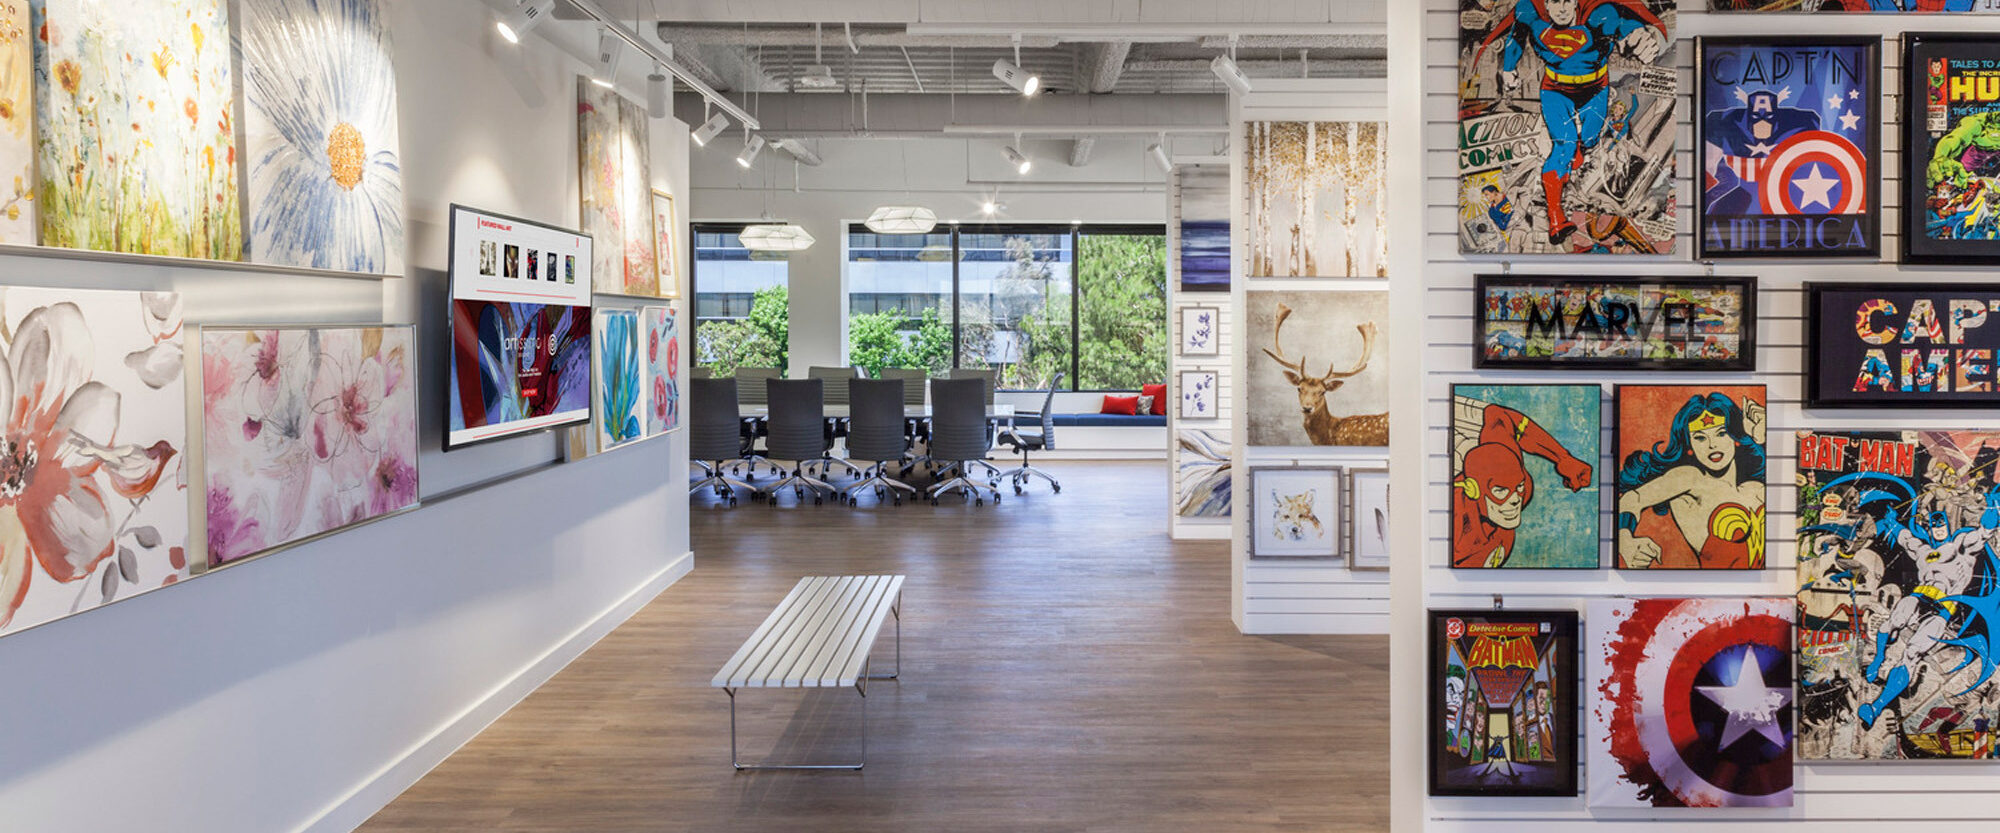 Bright and spacious gallery featuring modern artwork. Exposed ductwork contrasts with white walls adorned with vibrant paintings and comic-themed pieces. Sleek bench and parquet floor complement the room's contemporary aesthetic.